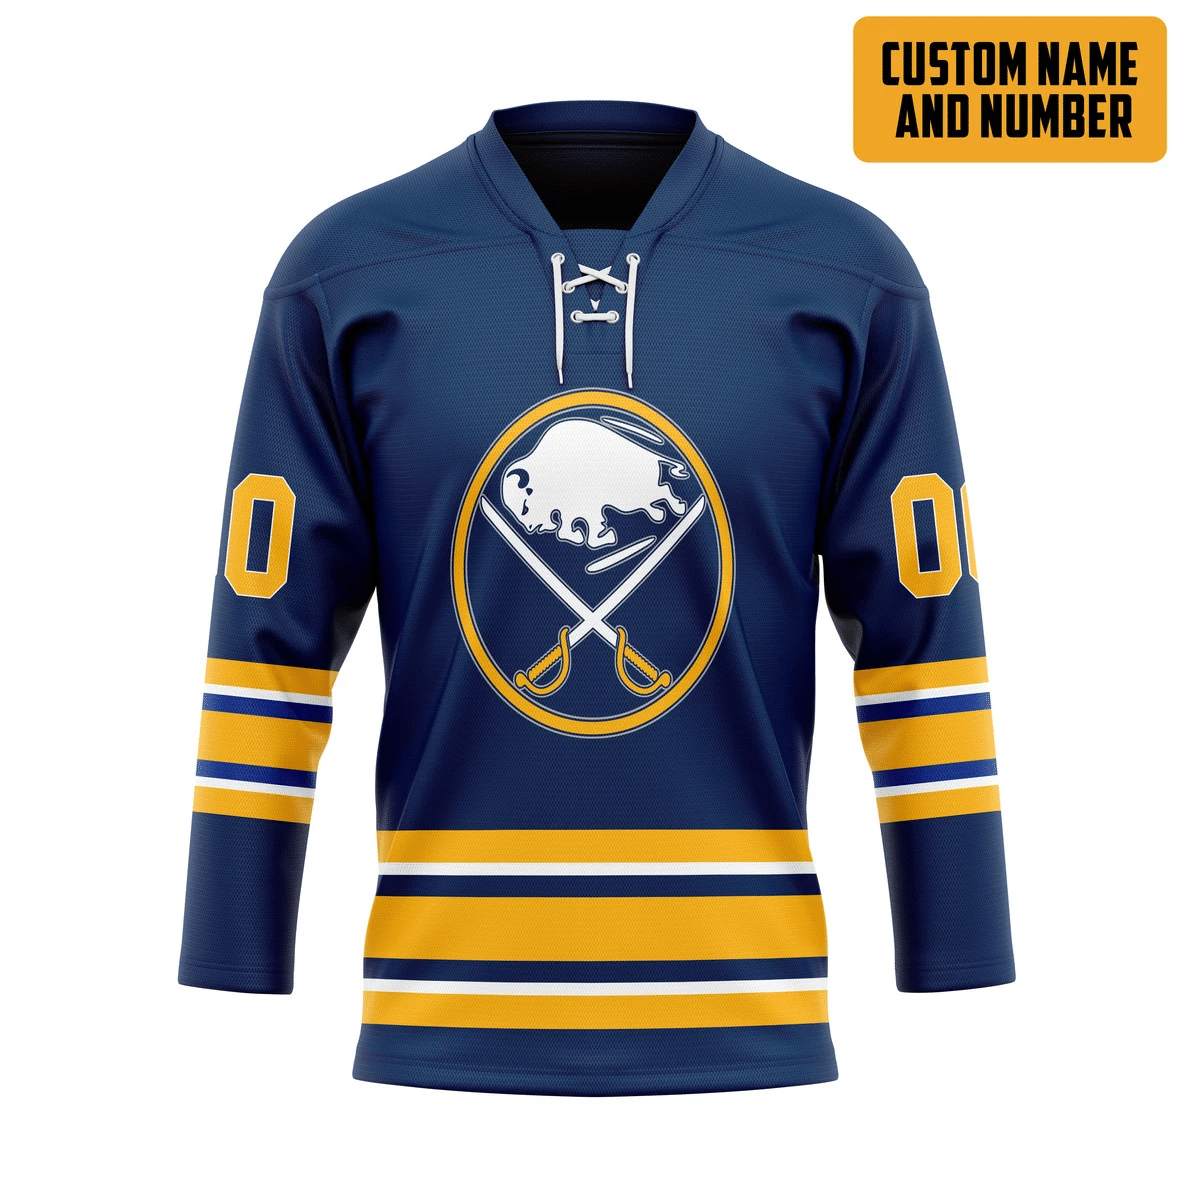 We have many different types of hockey jerseys. 9